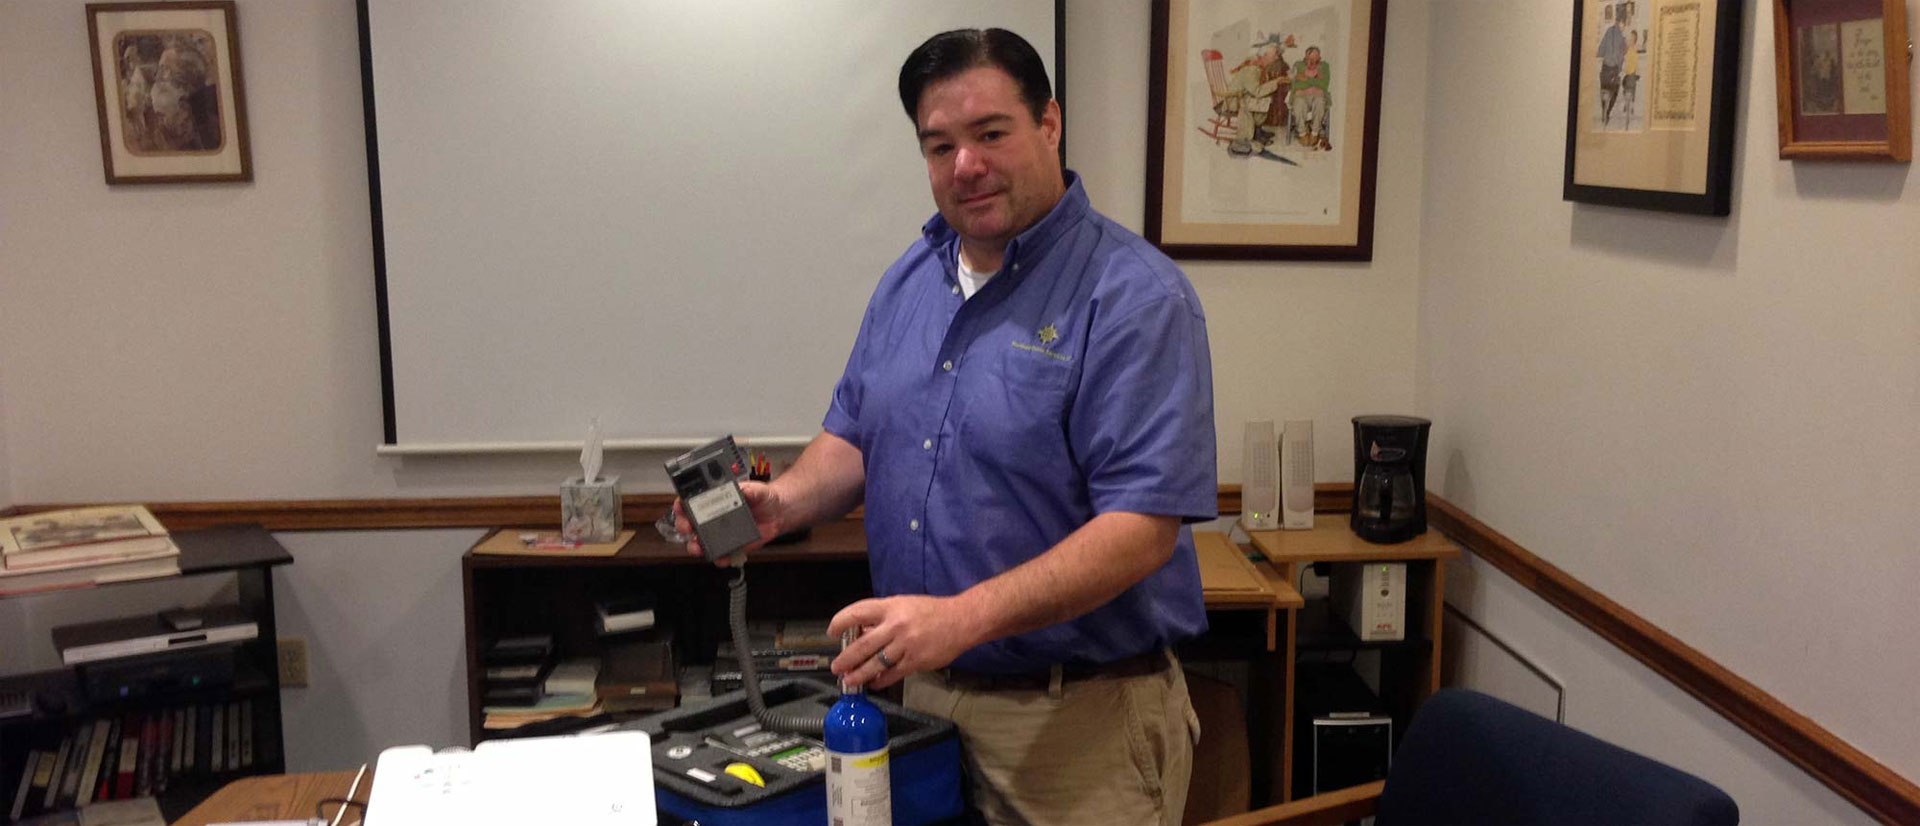 Keith R. Gosselin is a Certified Calibration Technician on the RBT IV